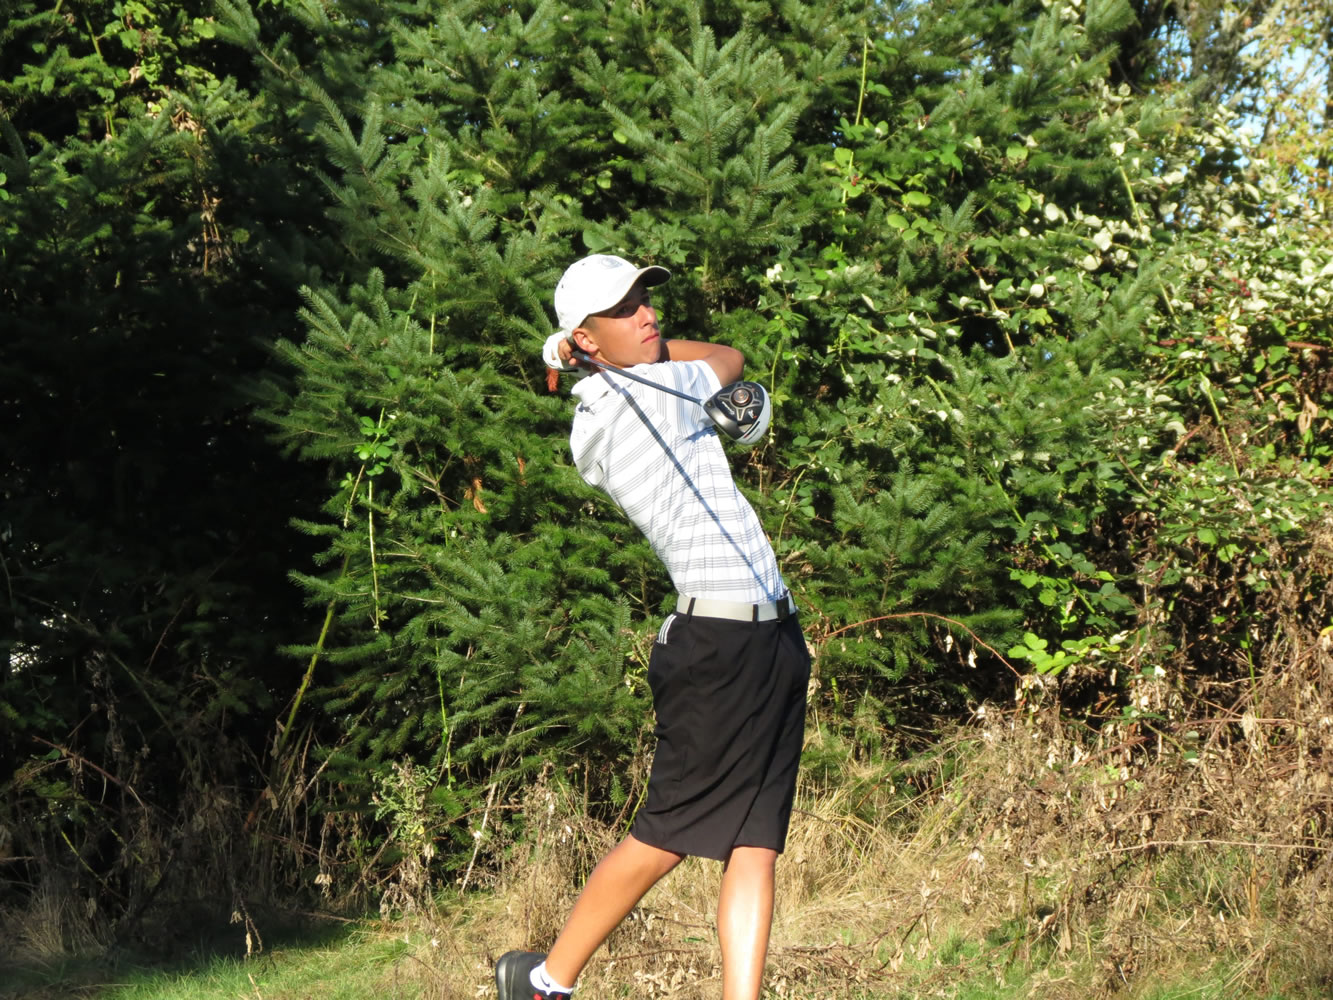 CHS senior Braeden Campbell tied the school record after shooting a round of 31 strokes Oct. 1, at Camas Meadows.